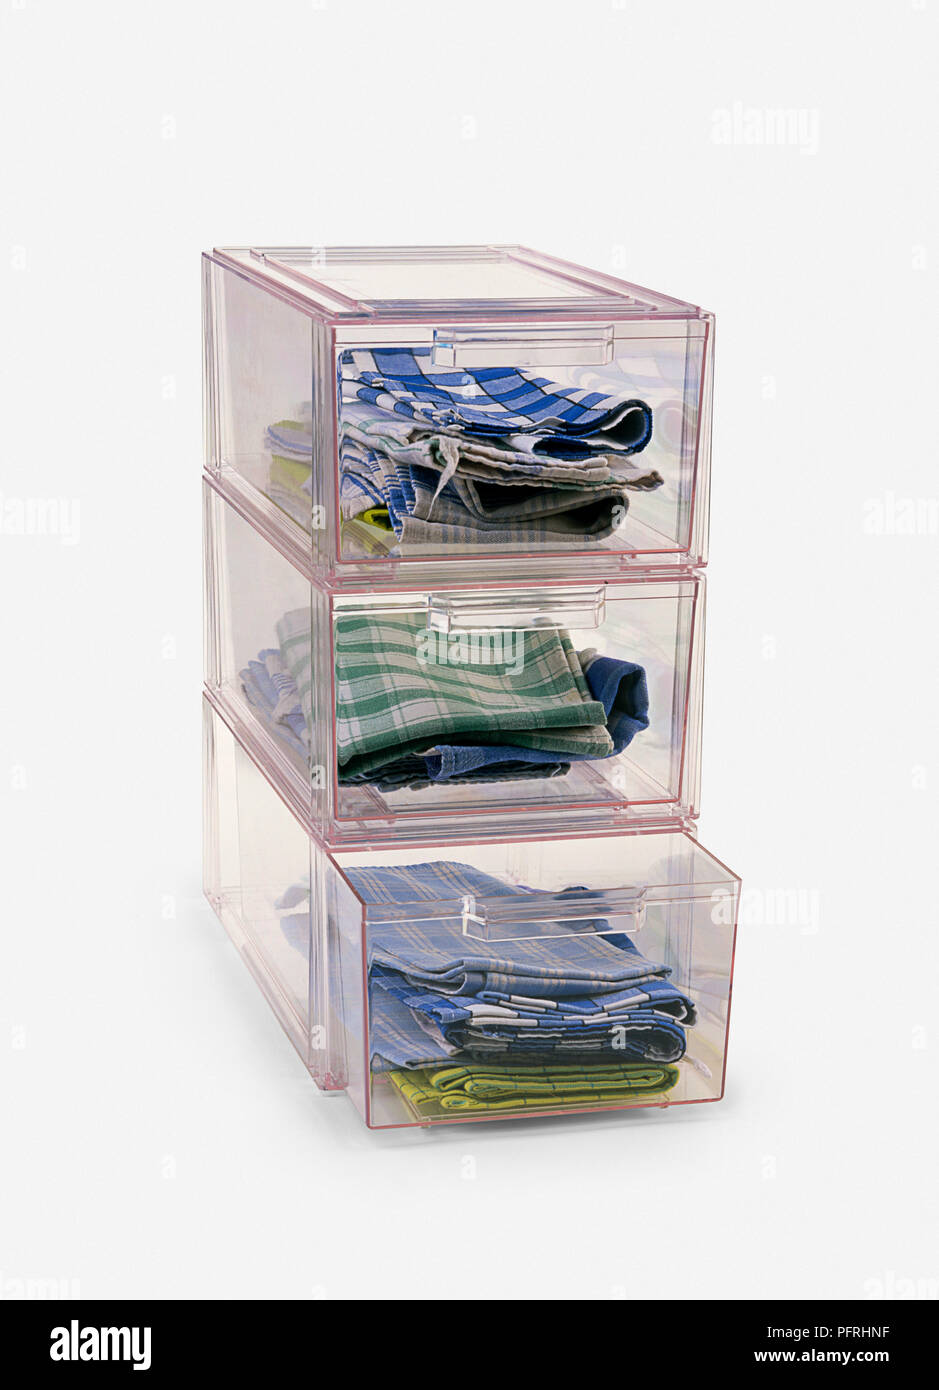 Clear Plastic Stacking Boxes With Drawers For Storing Fabrics